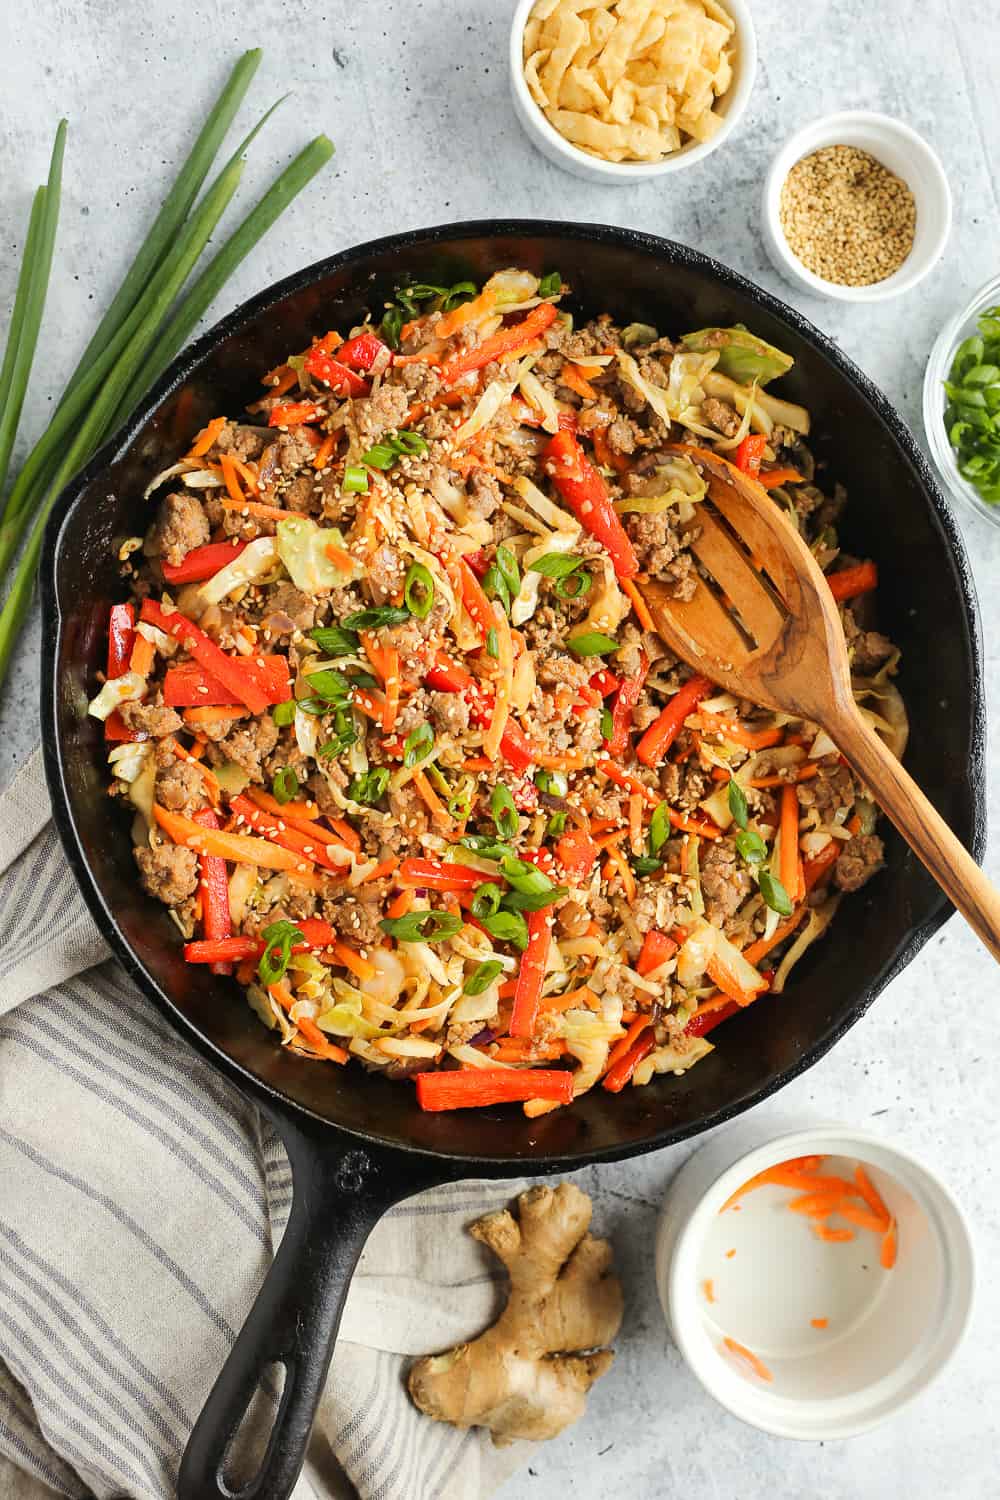 A black cast iron skillet filled with ground pork, colorful veggies, and topped with sliced green onions